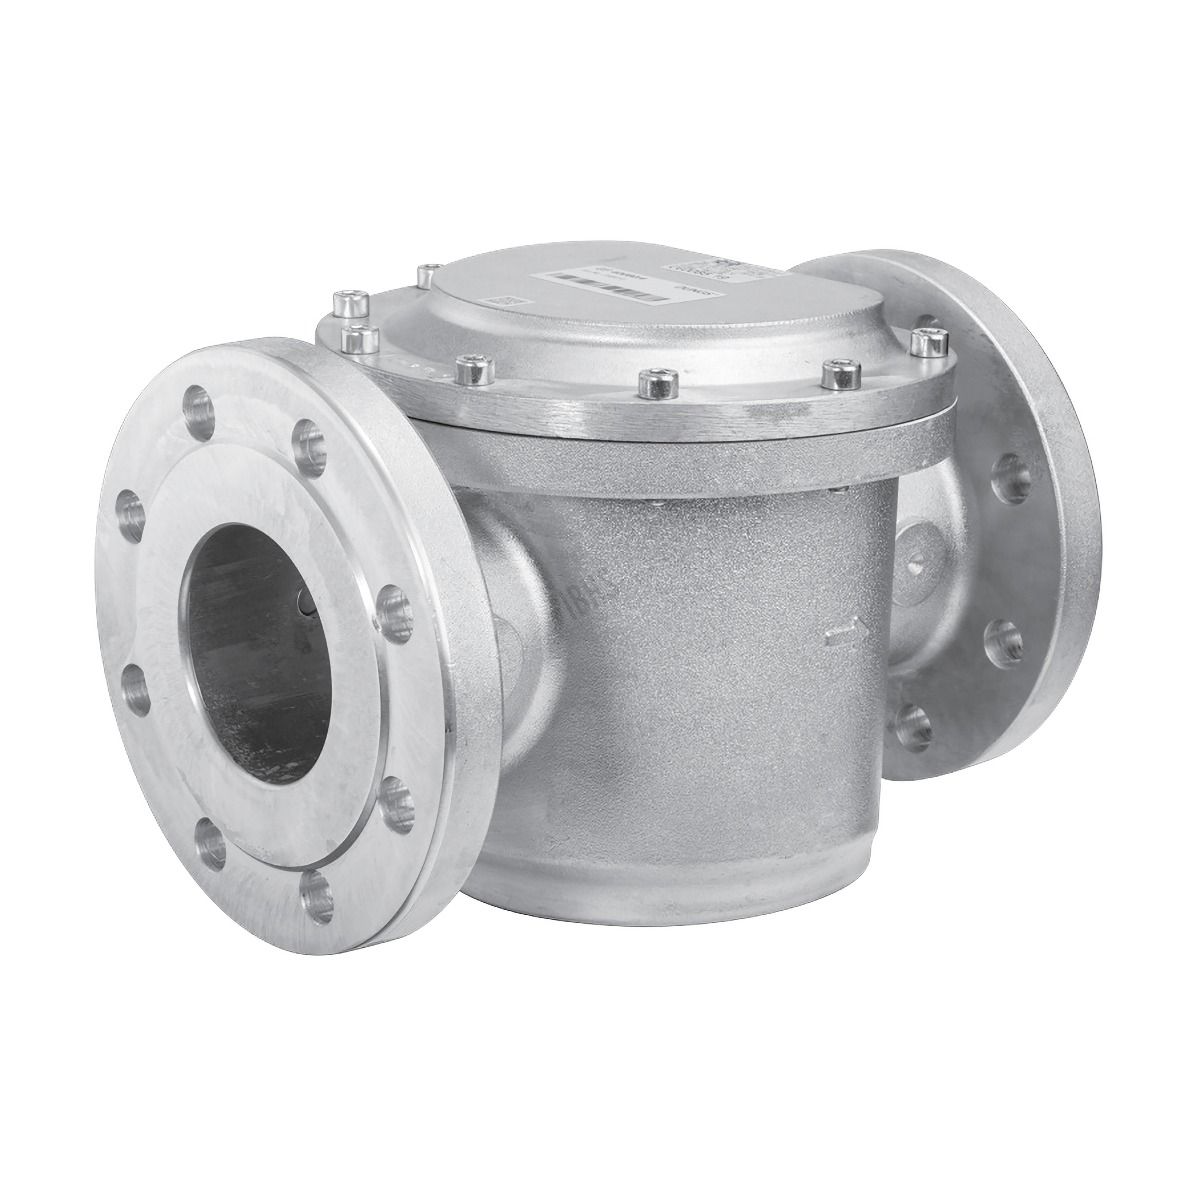 65mm Flanged PN16 Gas Filter 6 Bar Max Operating Pressure